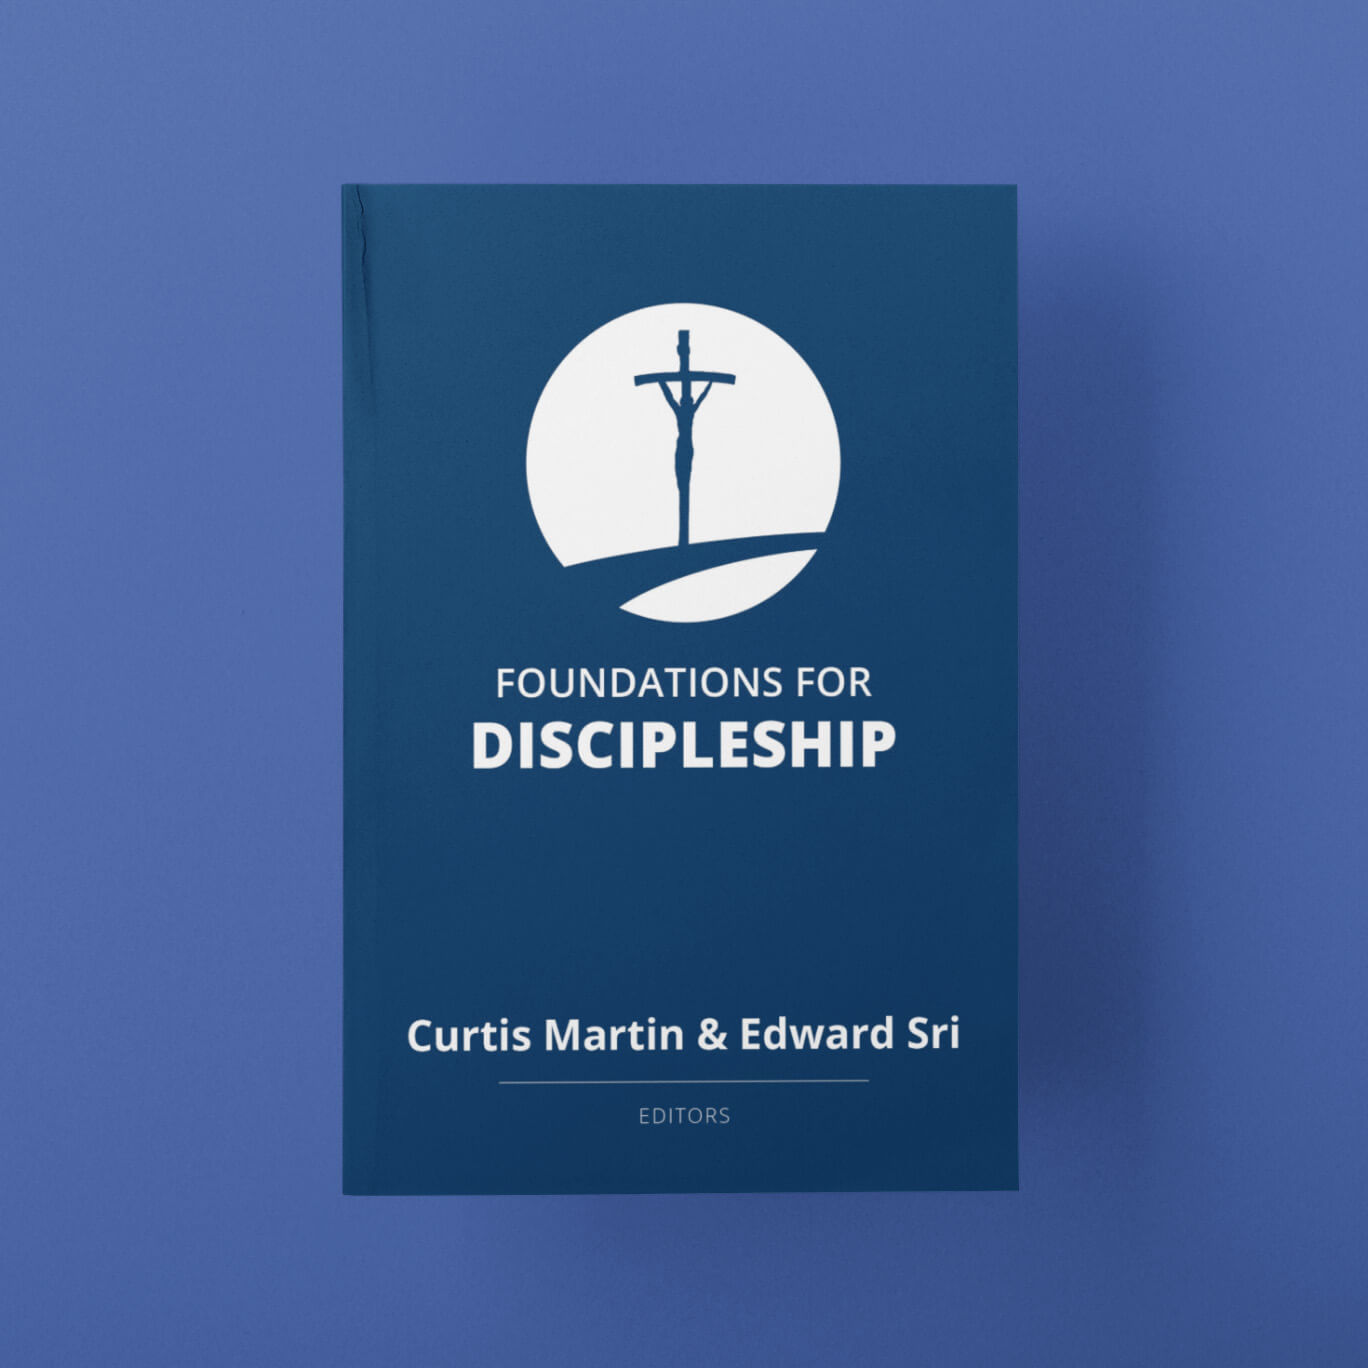 FOCUS Mission Partner Resources Supporters Foundations For Discipleship Book